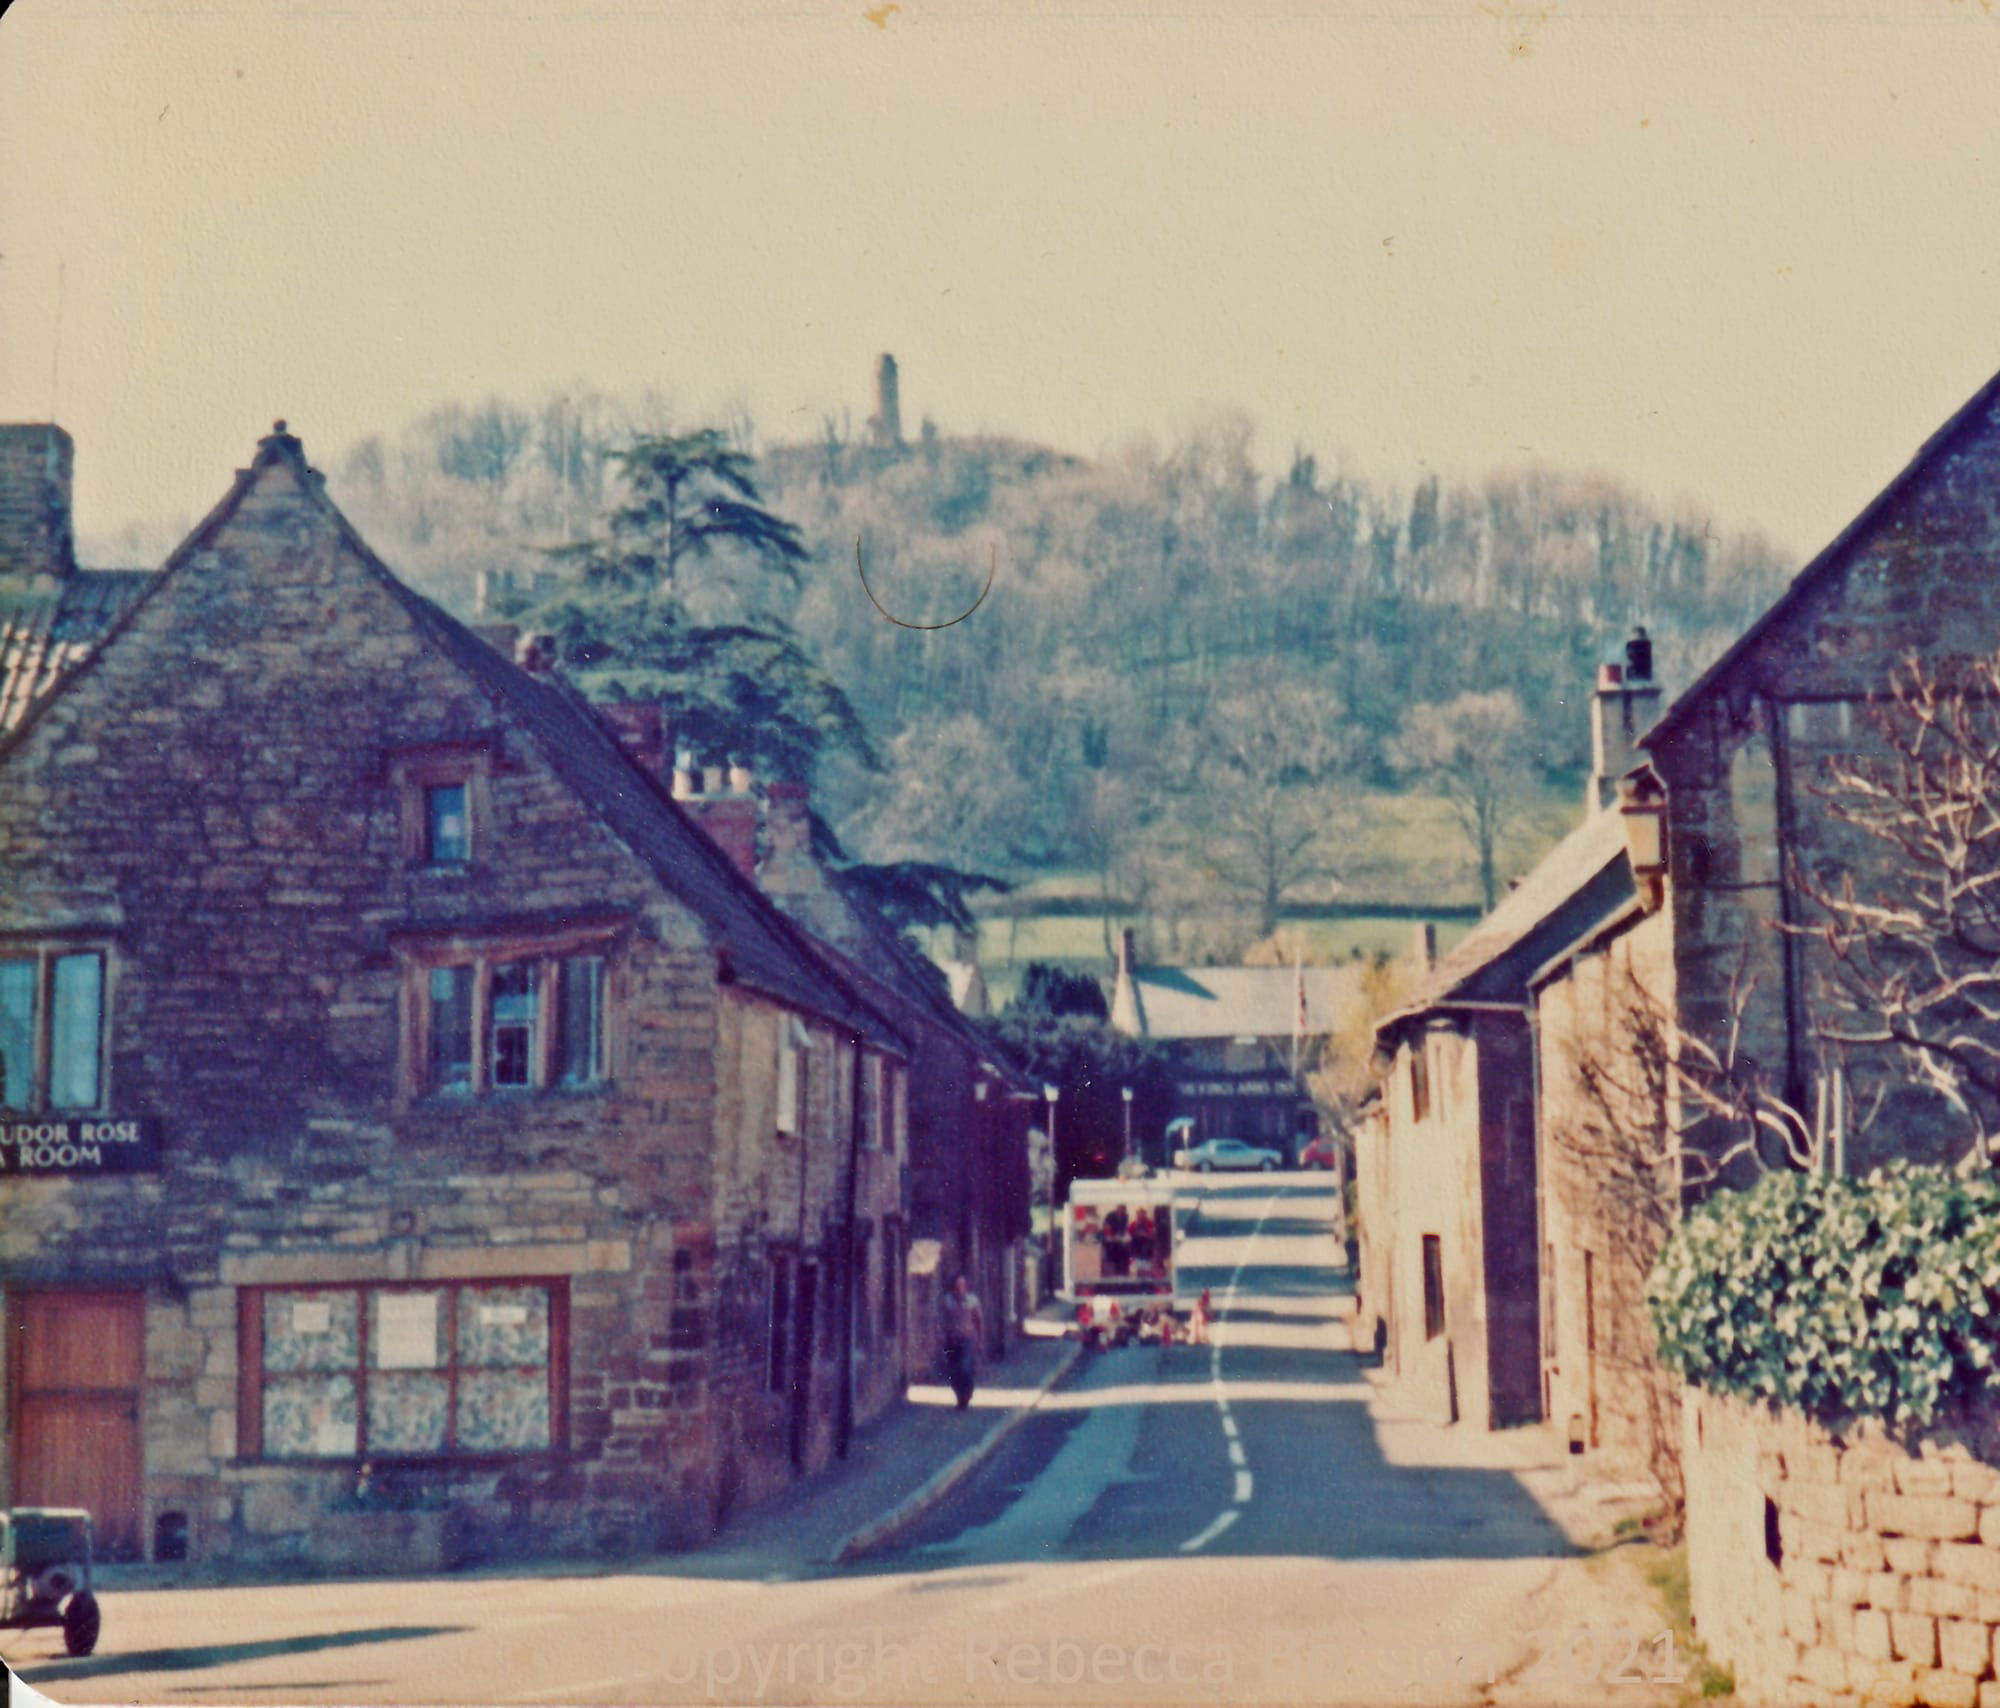 colour photo taken from the Borough entrance to Montacute House looking up middle street to the tower with 'Tudor Rose Tea Room' sign on the building on the corner of middle street and the Borough